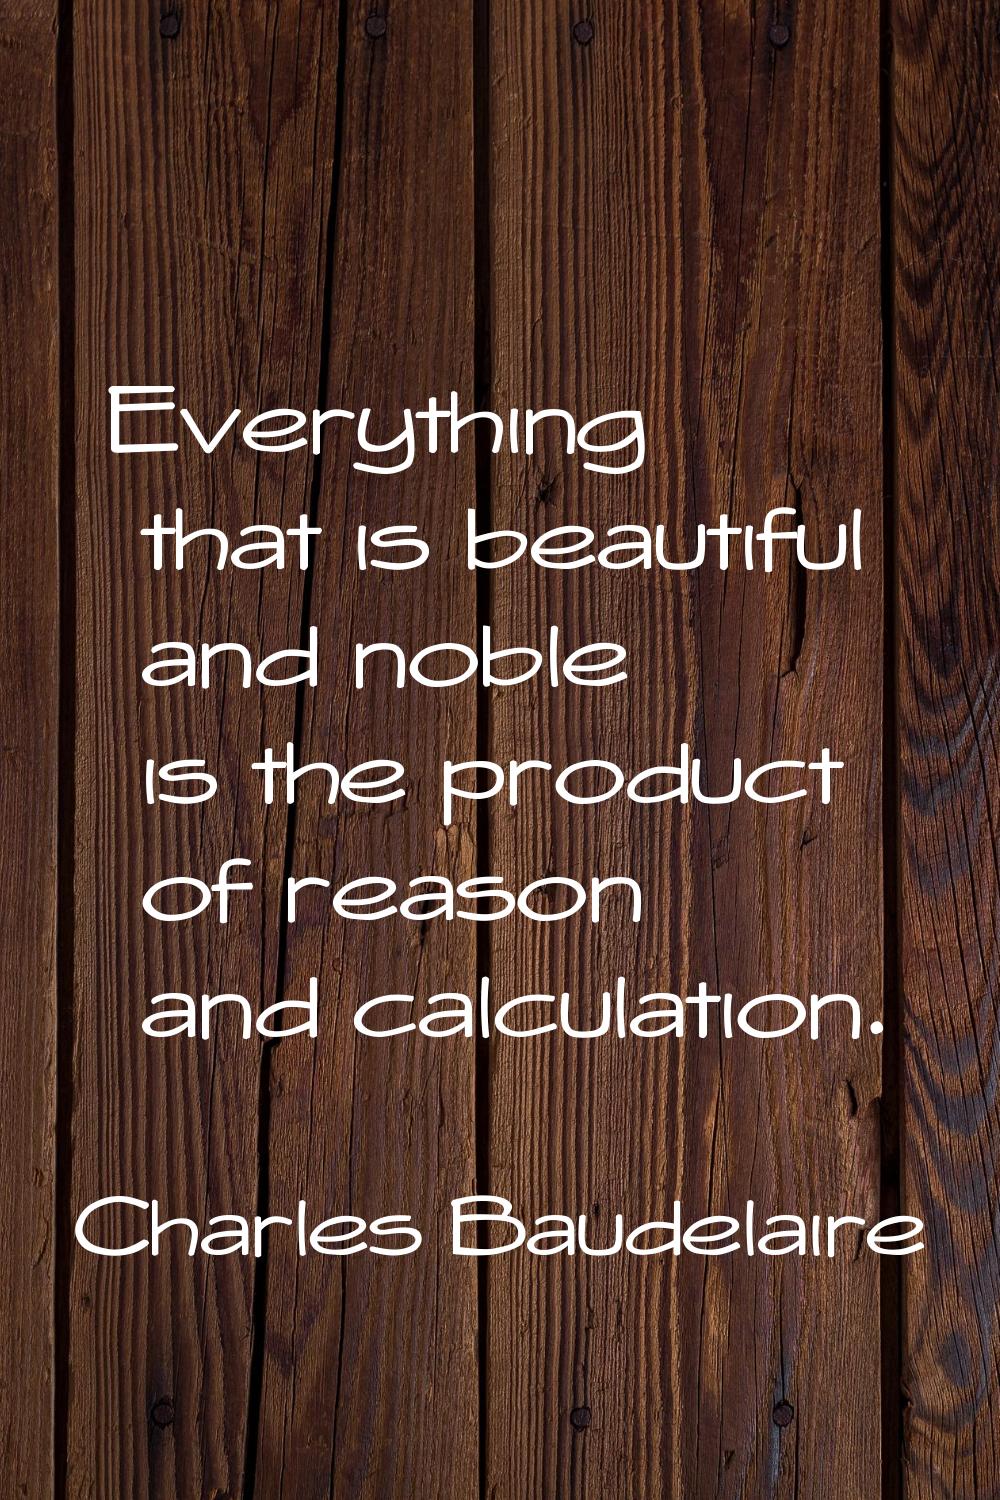 Everything that is beautiful and noble is the product of reason and calculation.